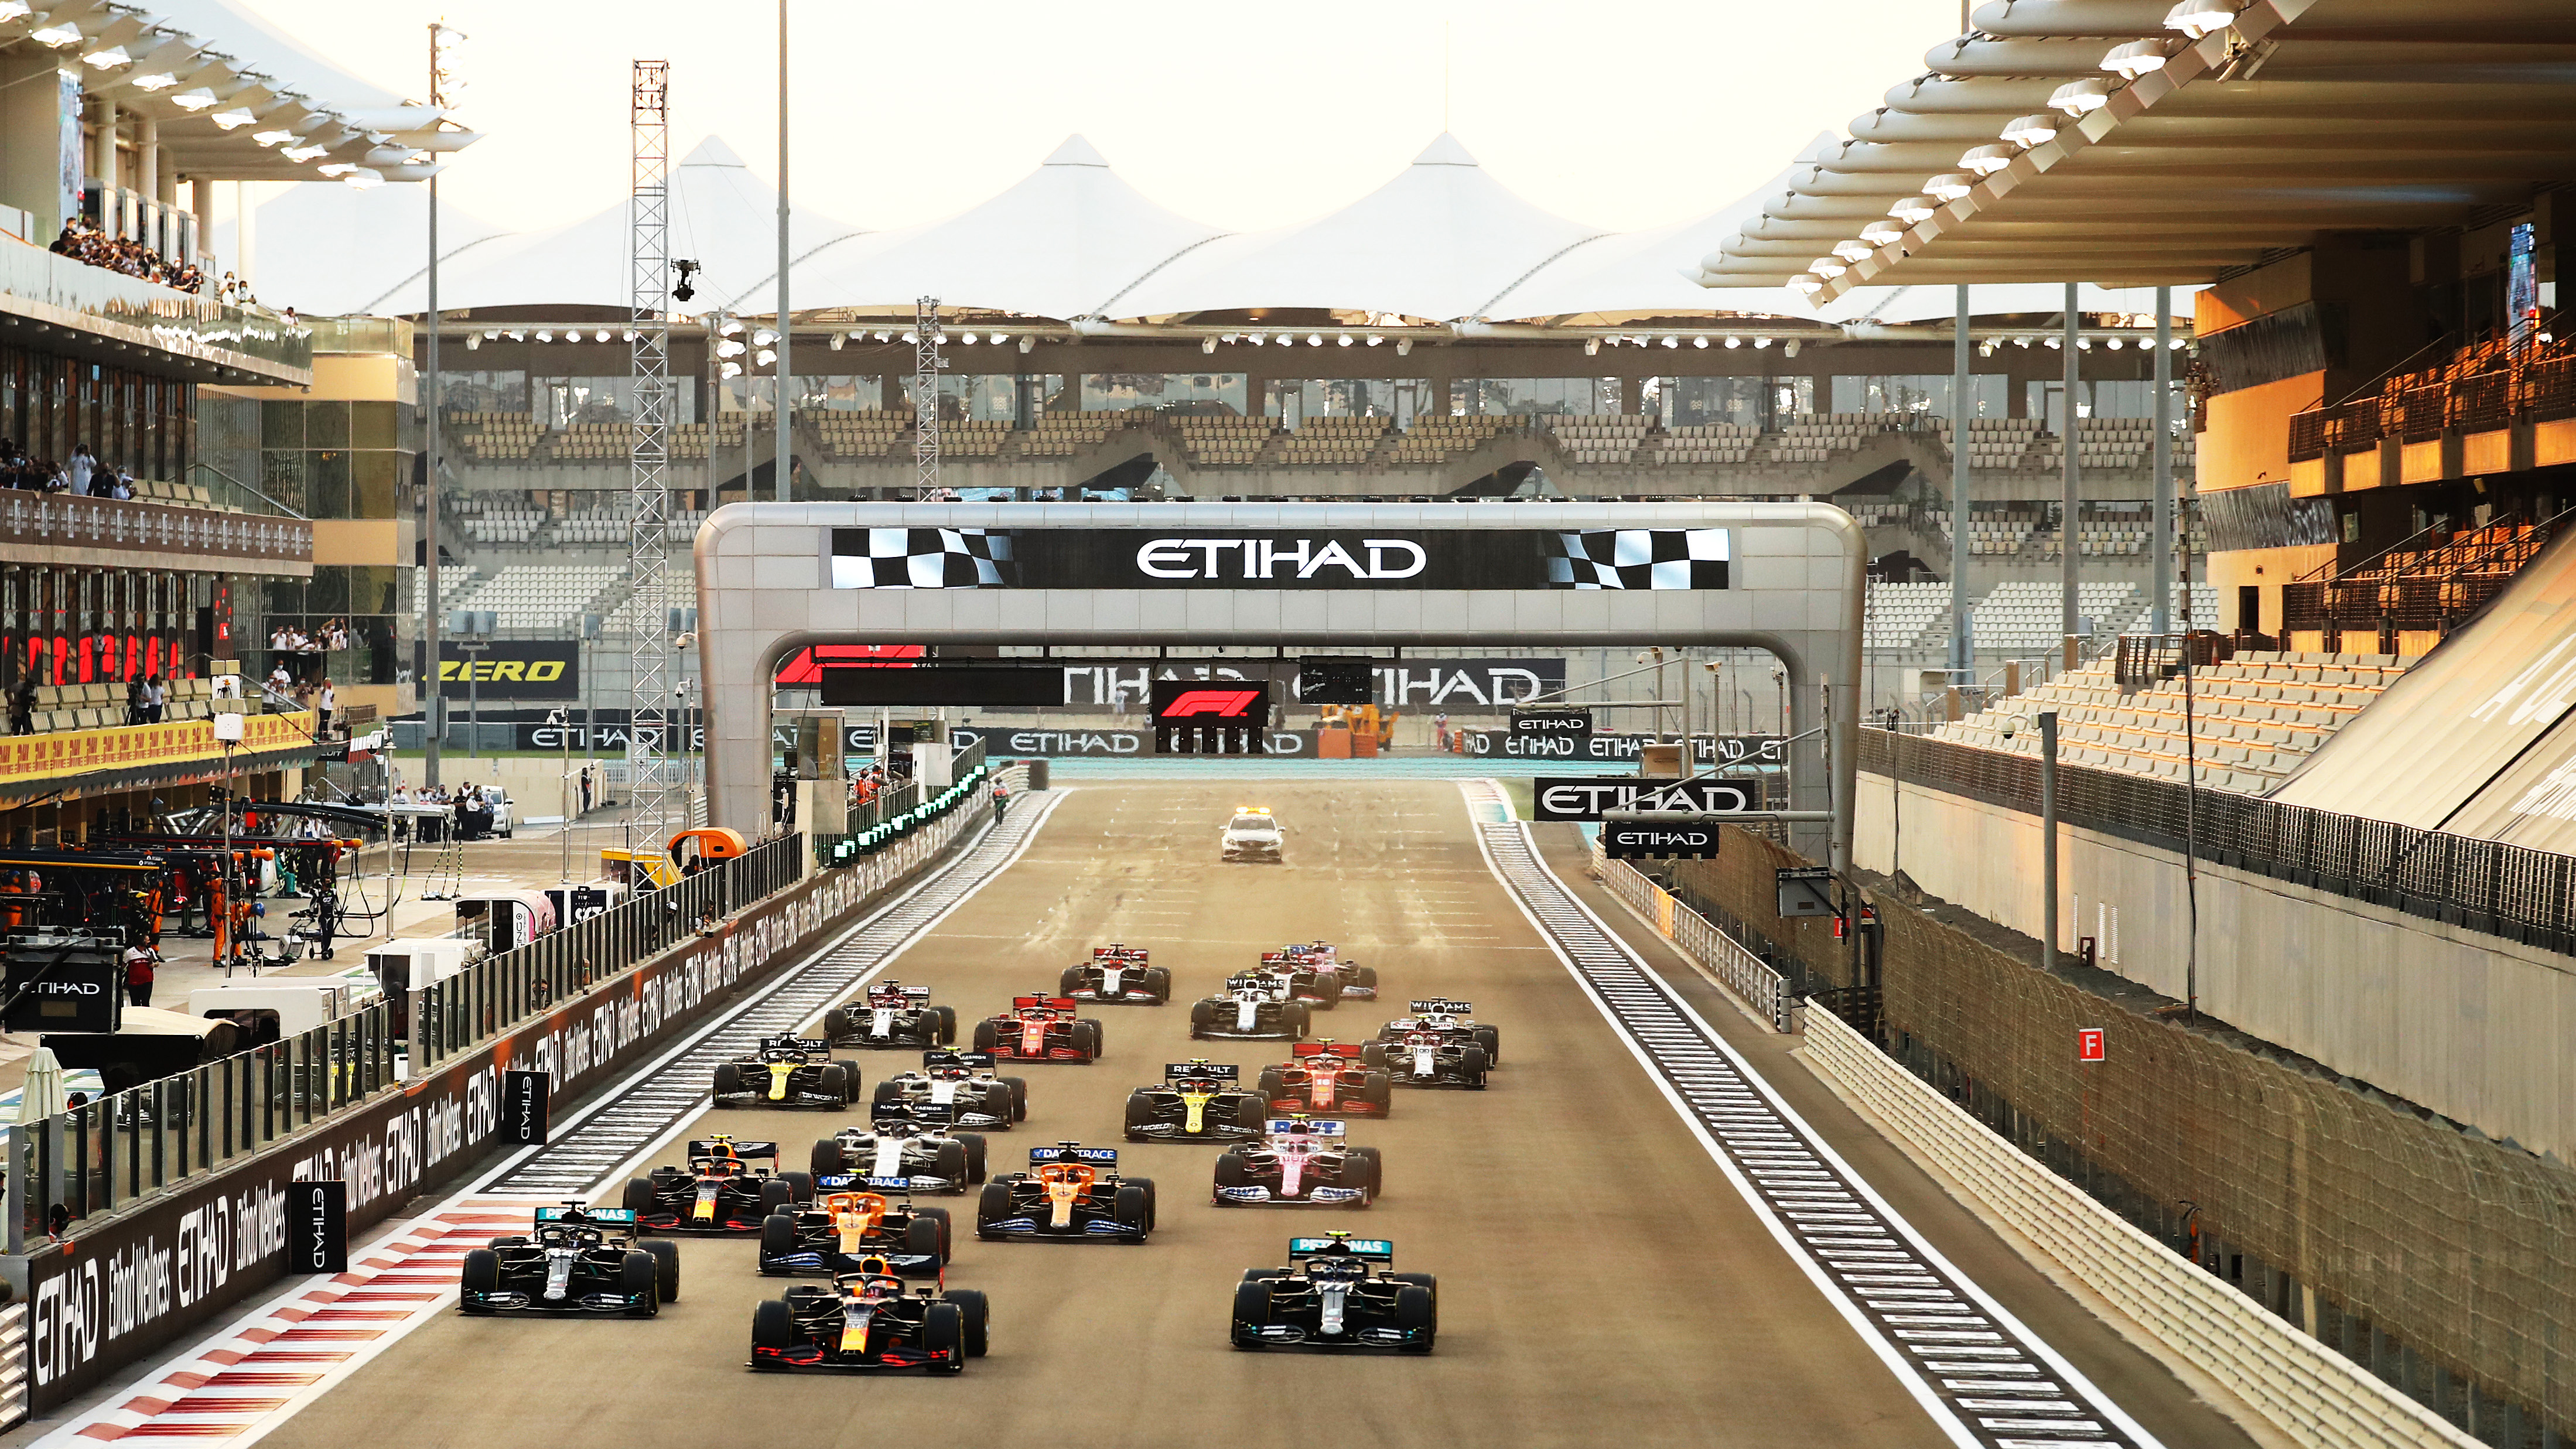 Eerste Race F1 2021 2021 F1 Grand Prix Start Times Confirmed Including A Return To Races Starting On The Hour